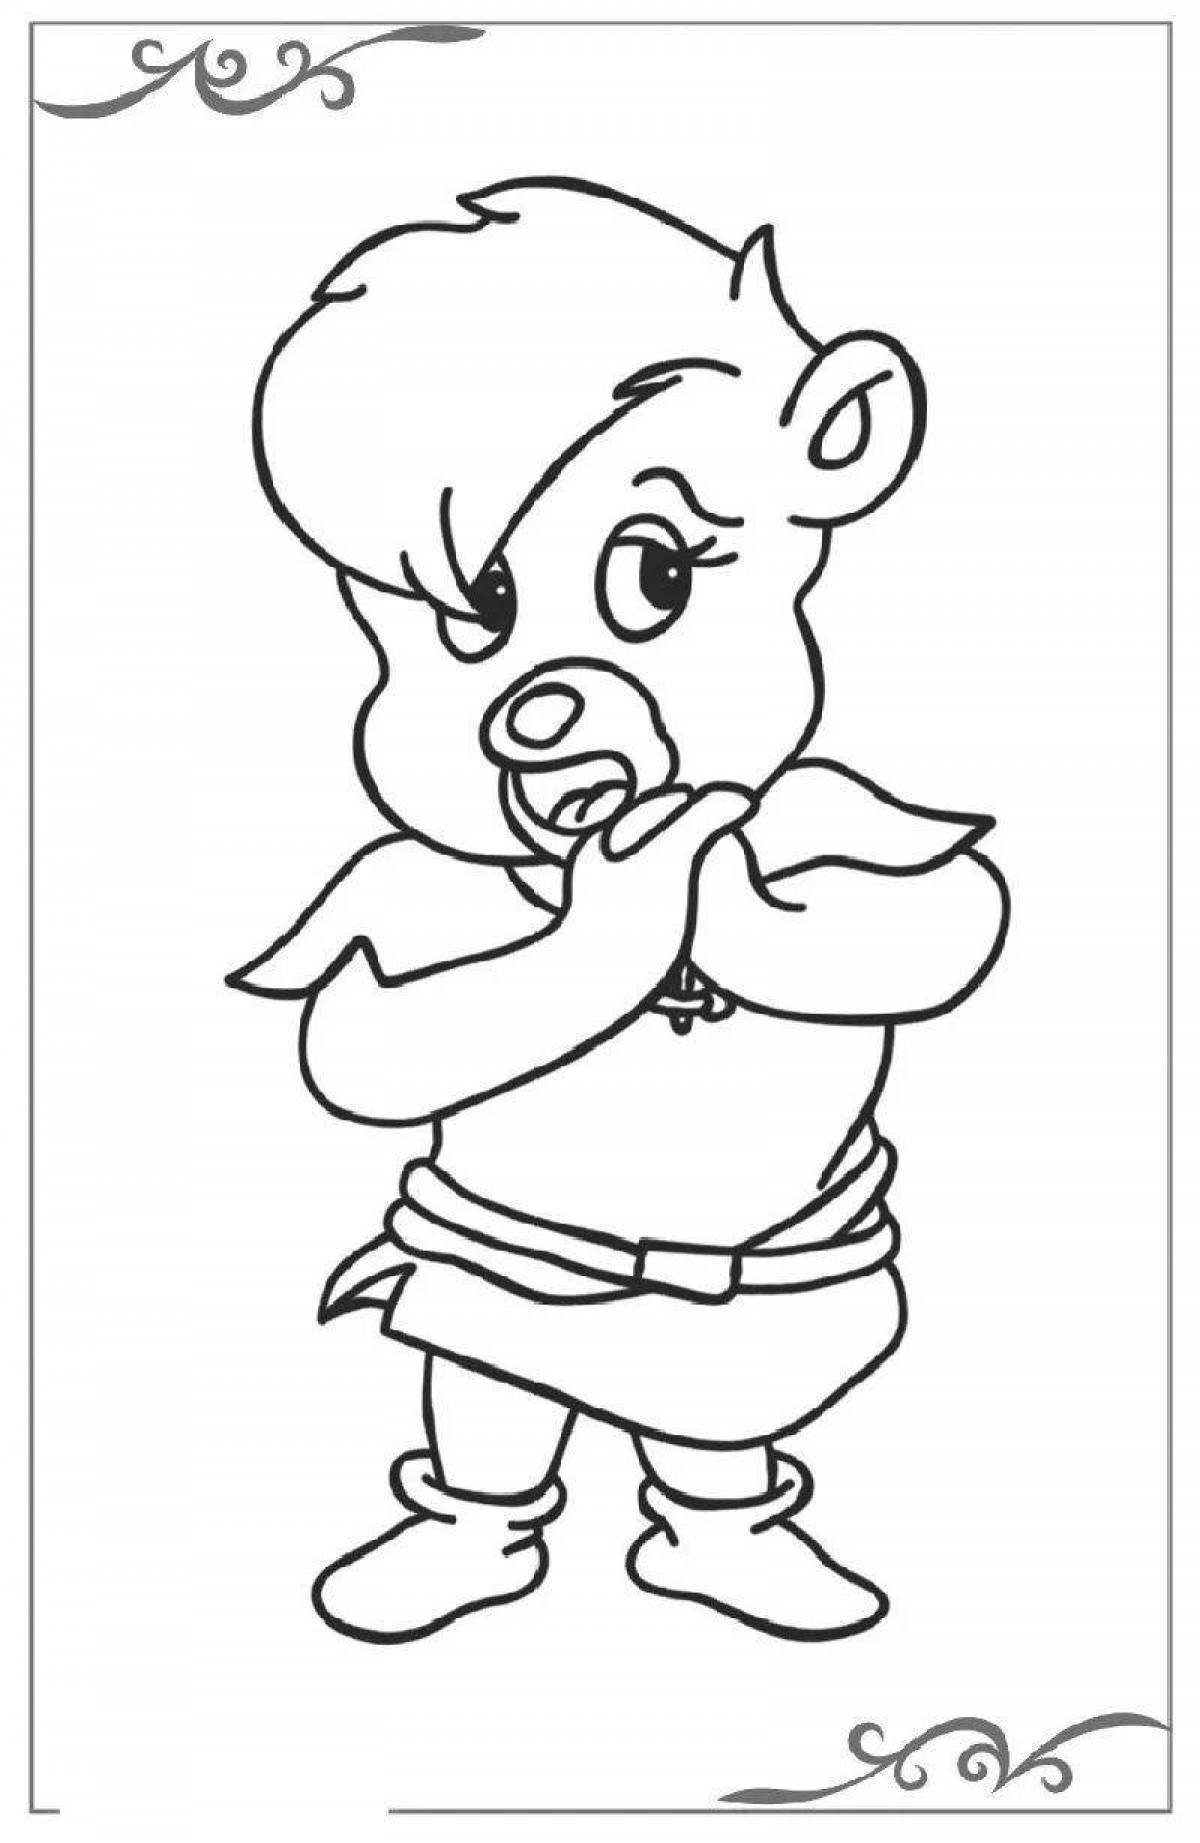 Adorable gummy bear coloring page